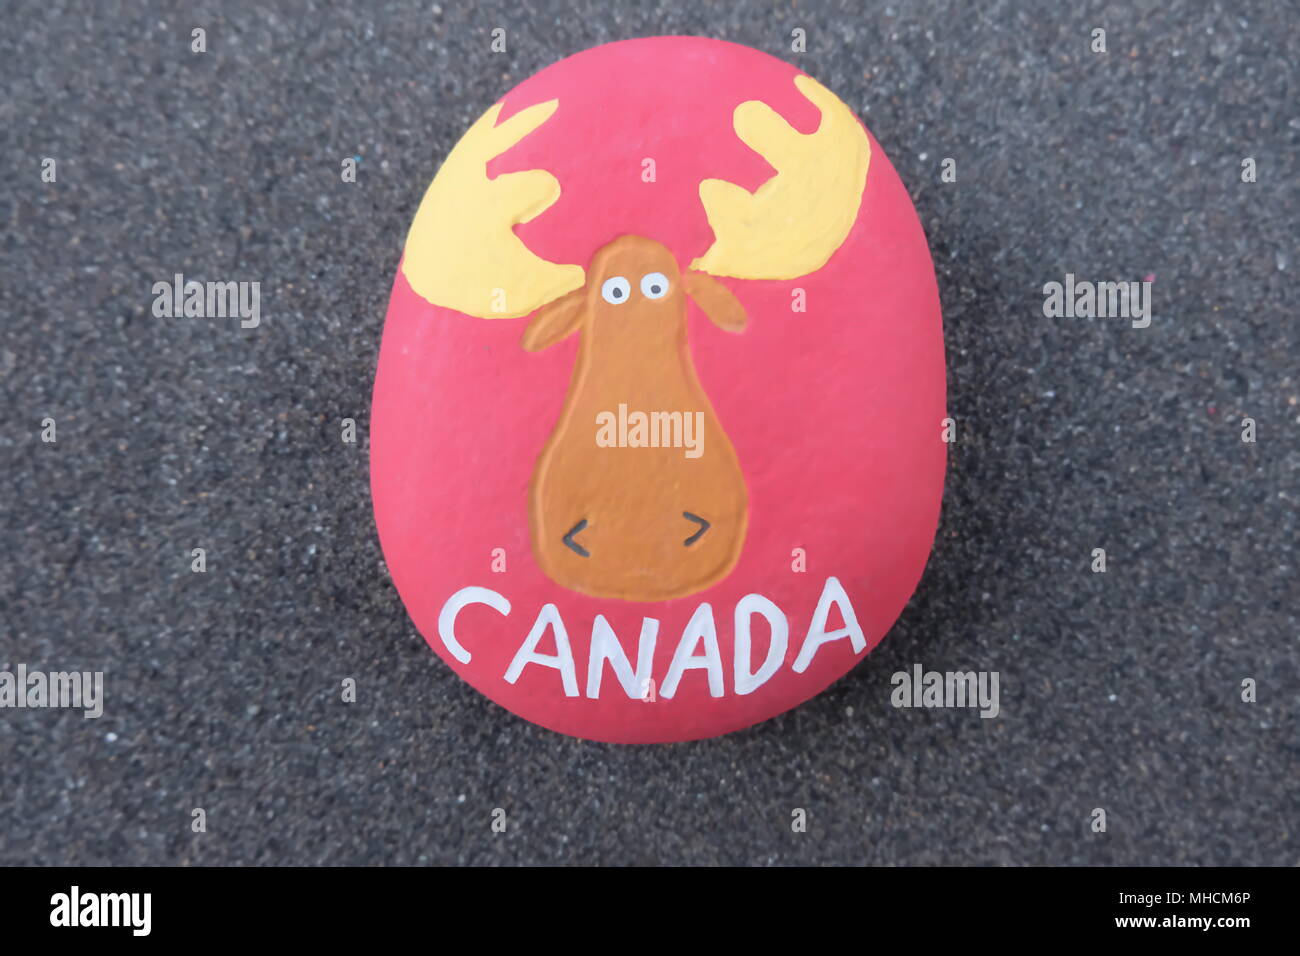 Canada, creative stone design for a unique logo or postcard and a stylized moose Stock Photo